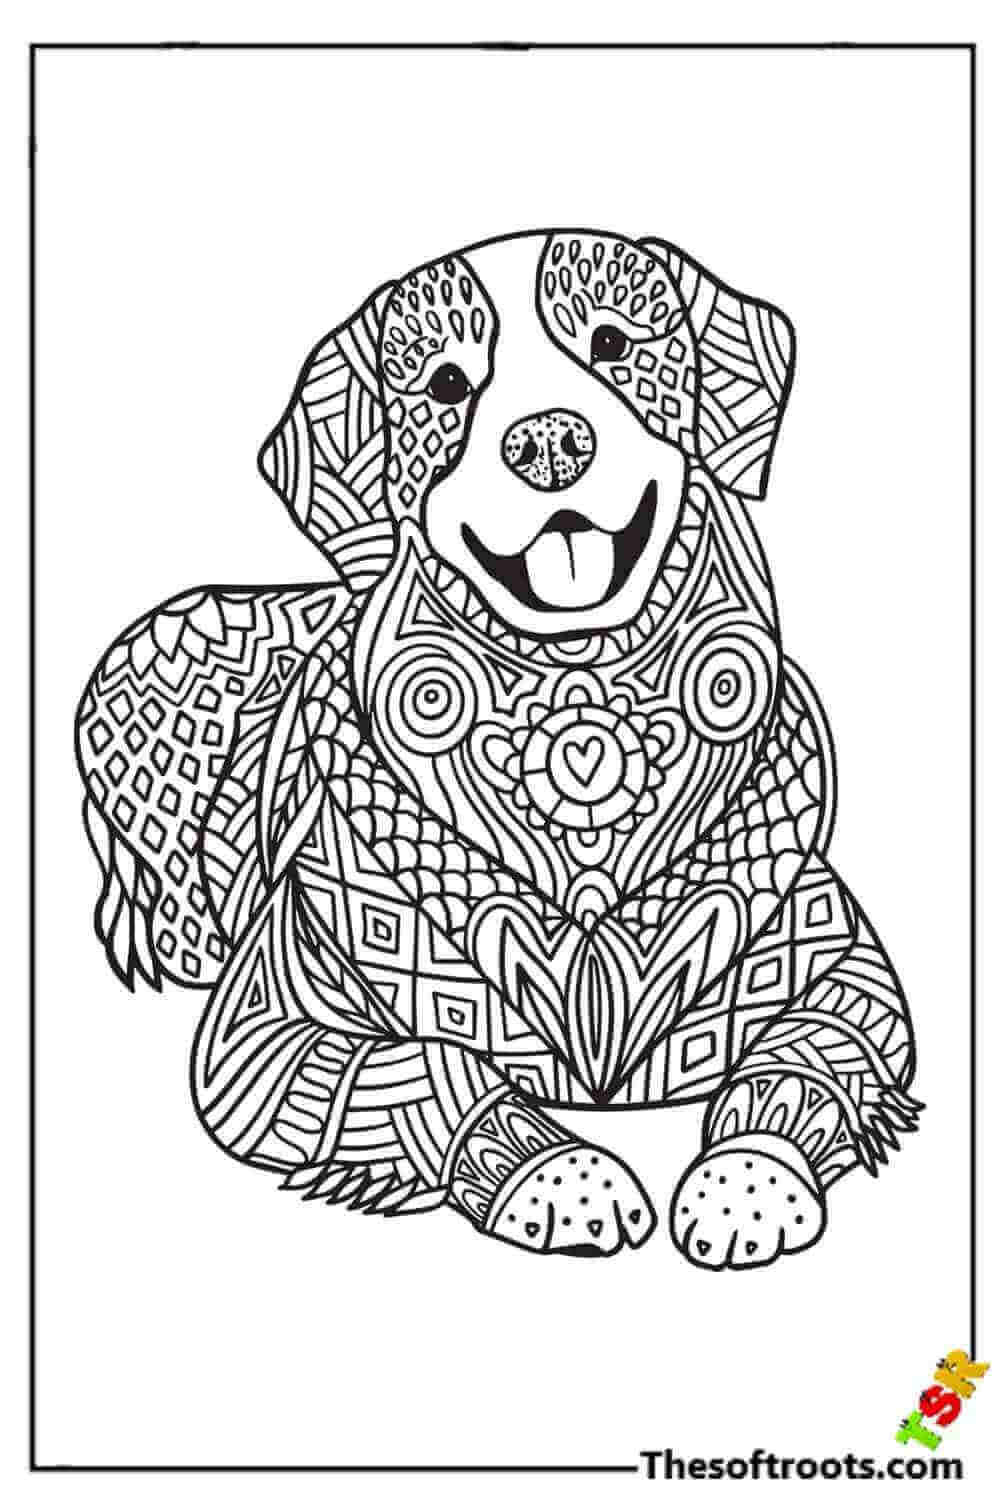 Adult Dog coloring pages